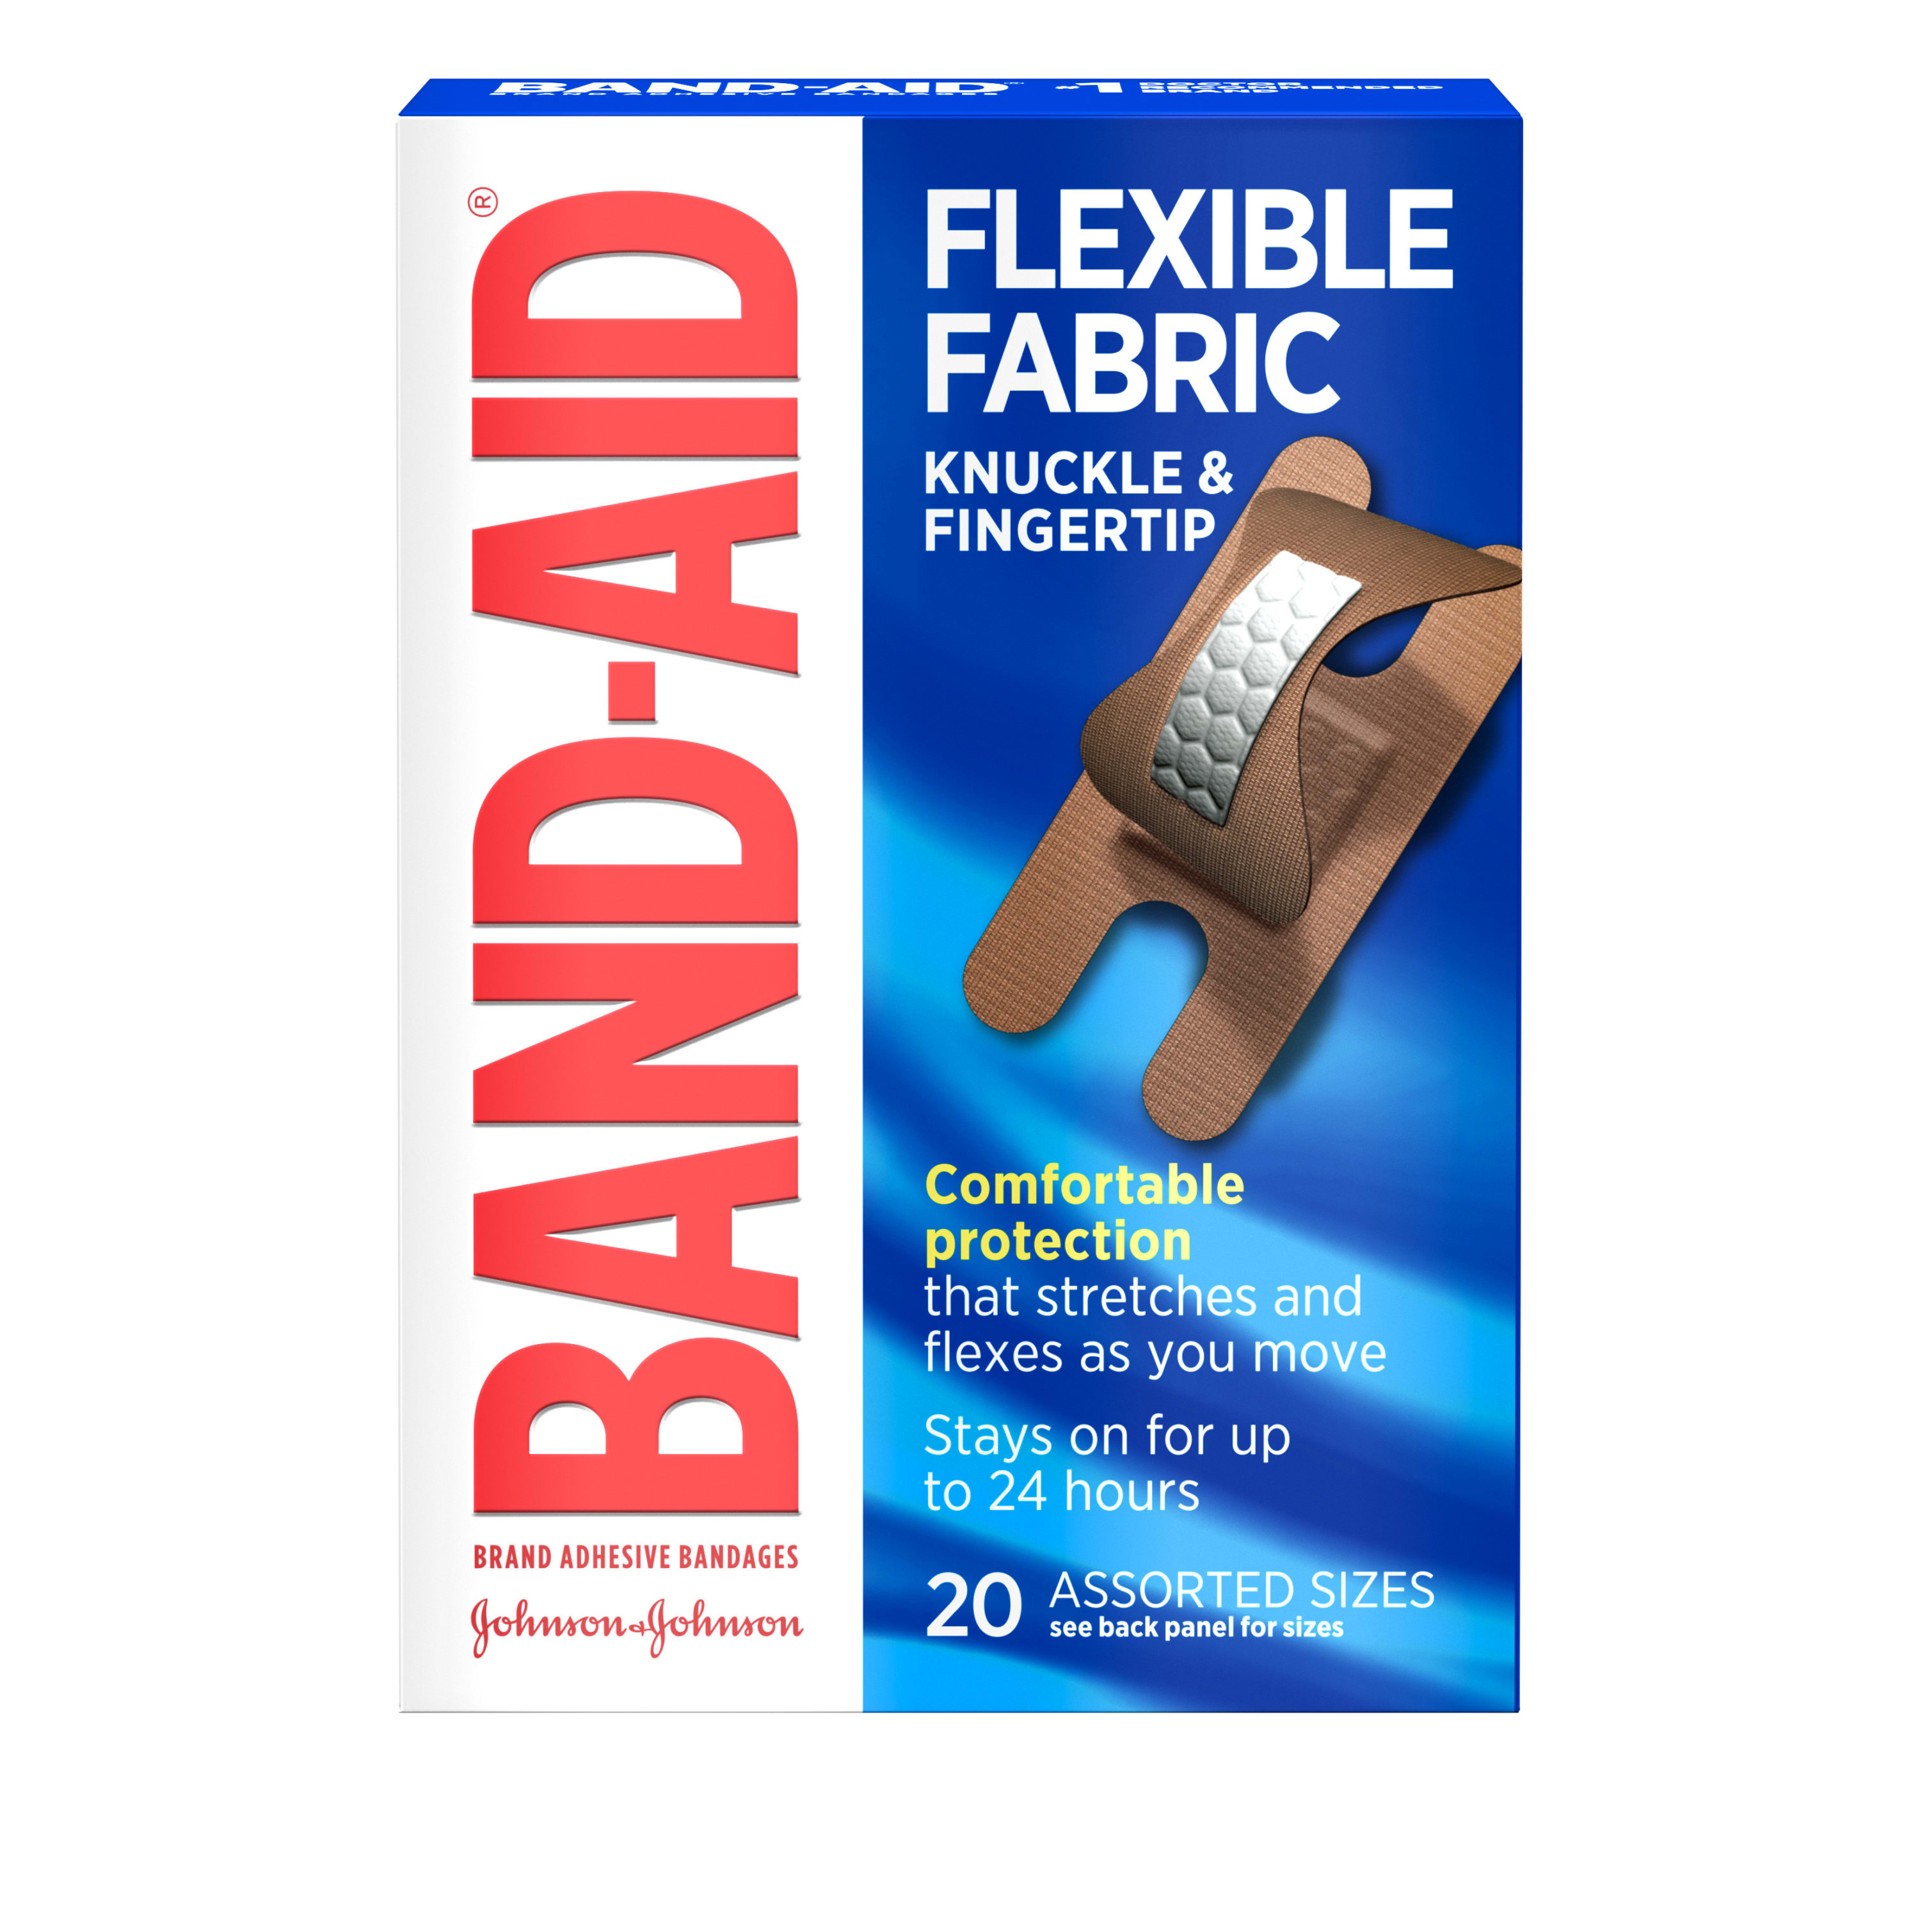 slide 1 of 7, BAND-AID Sterile Flexible Fabric Adhesive Bandages, For Protection & Wound Care of Minor Cuts & Burns, With Quilt-Aid Technology to Cushion Painful Wounds, Finger & Knuckle, 20 ct, 20 ct